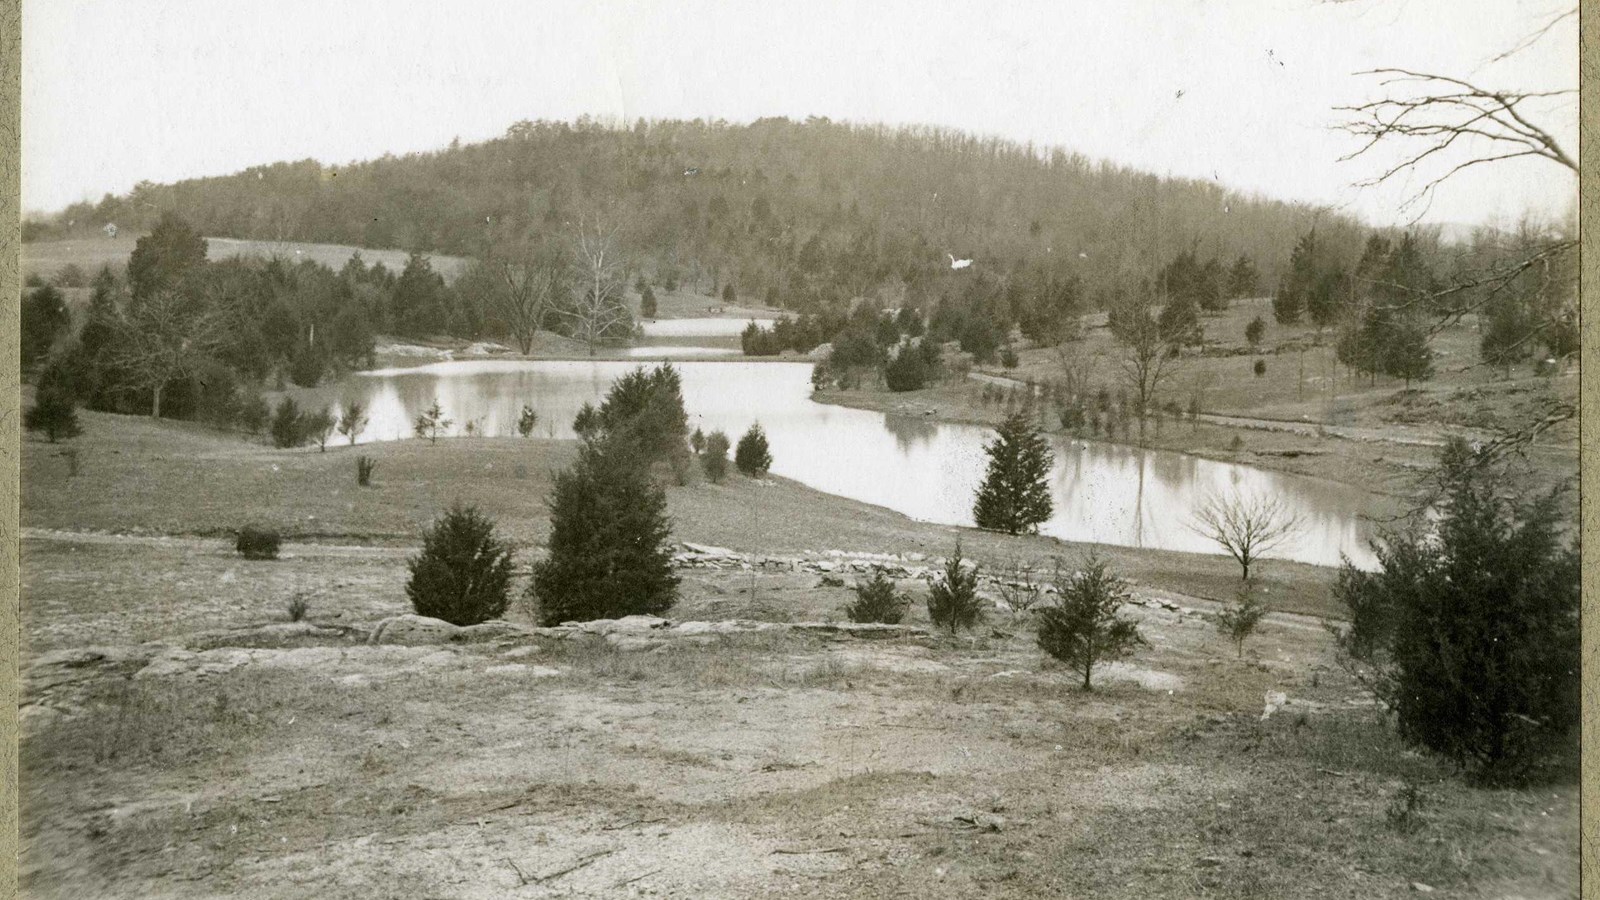 Black and white of grassy area with water and trees spread out on grassy area